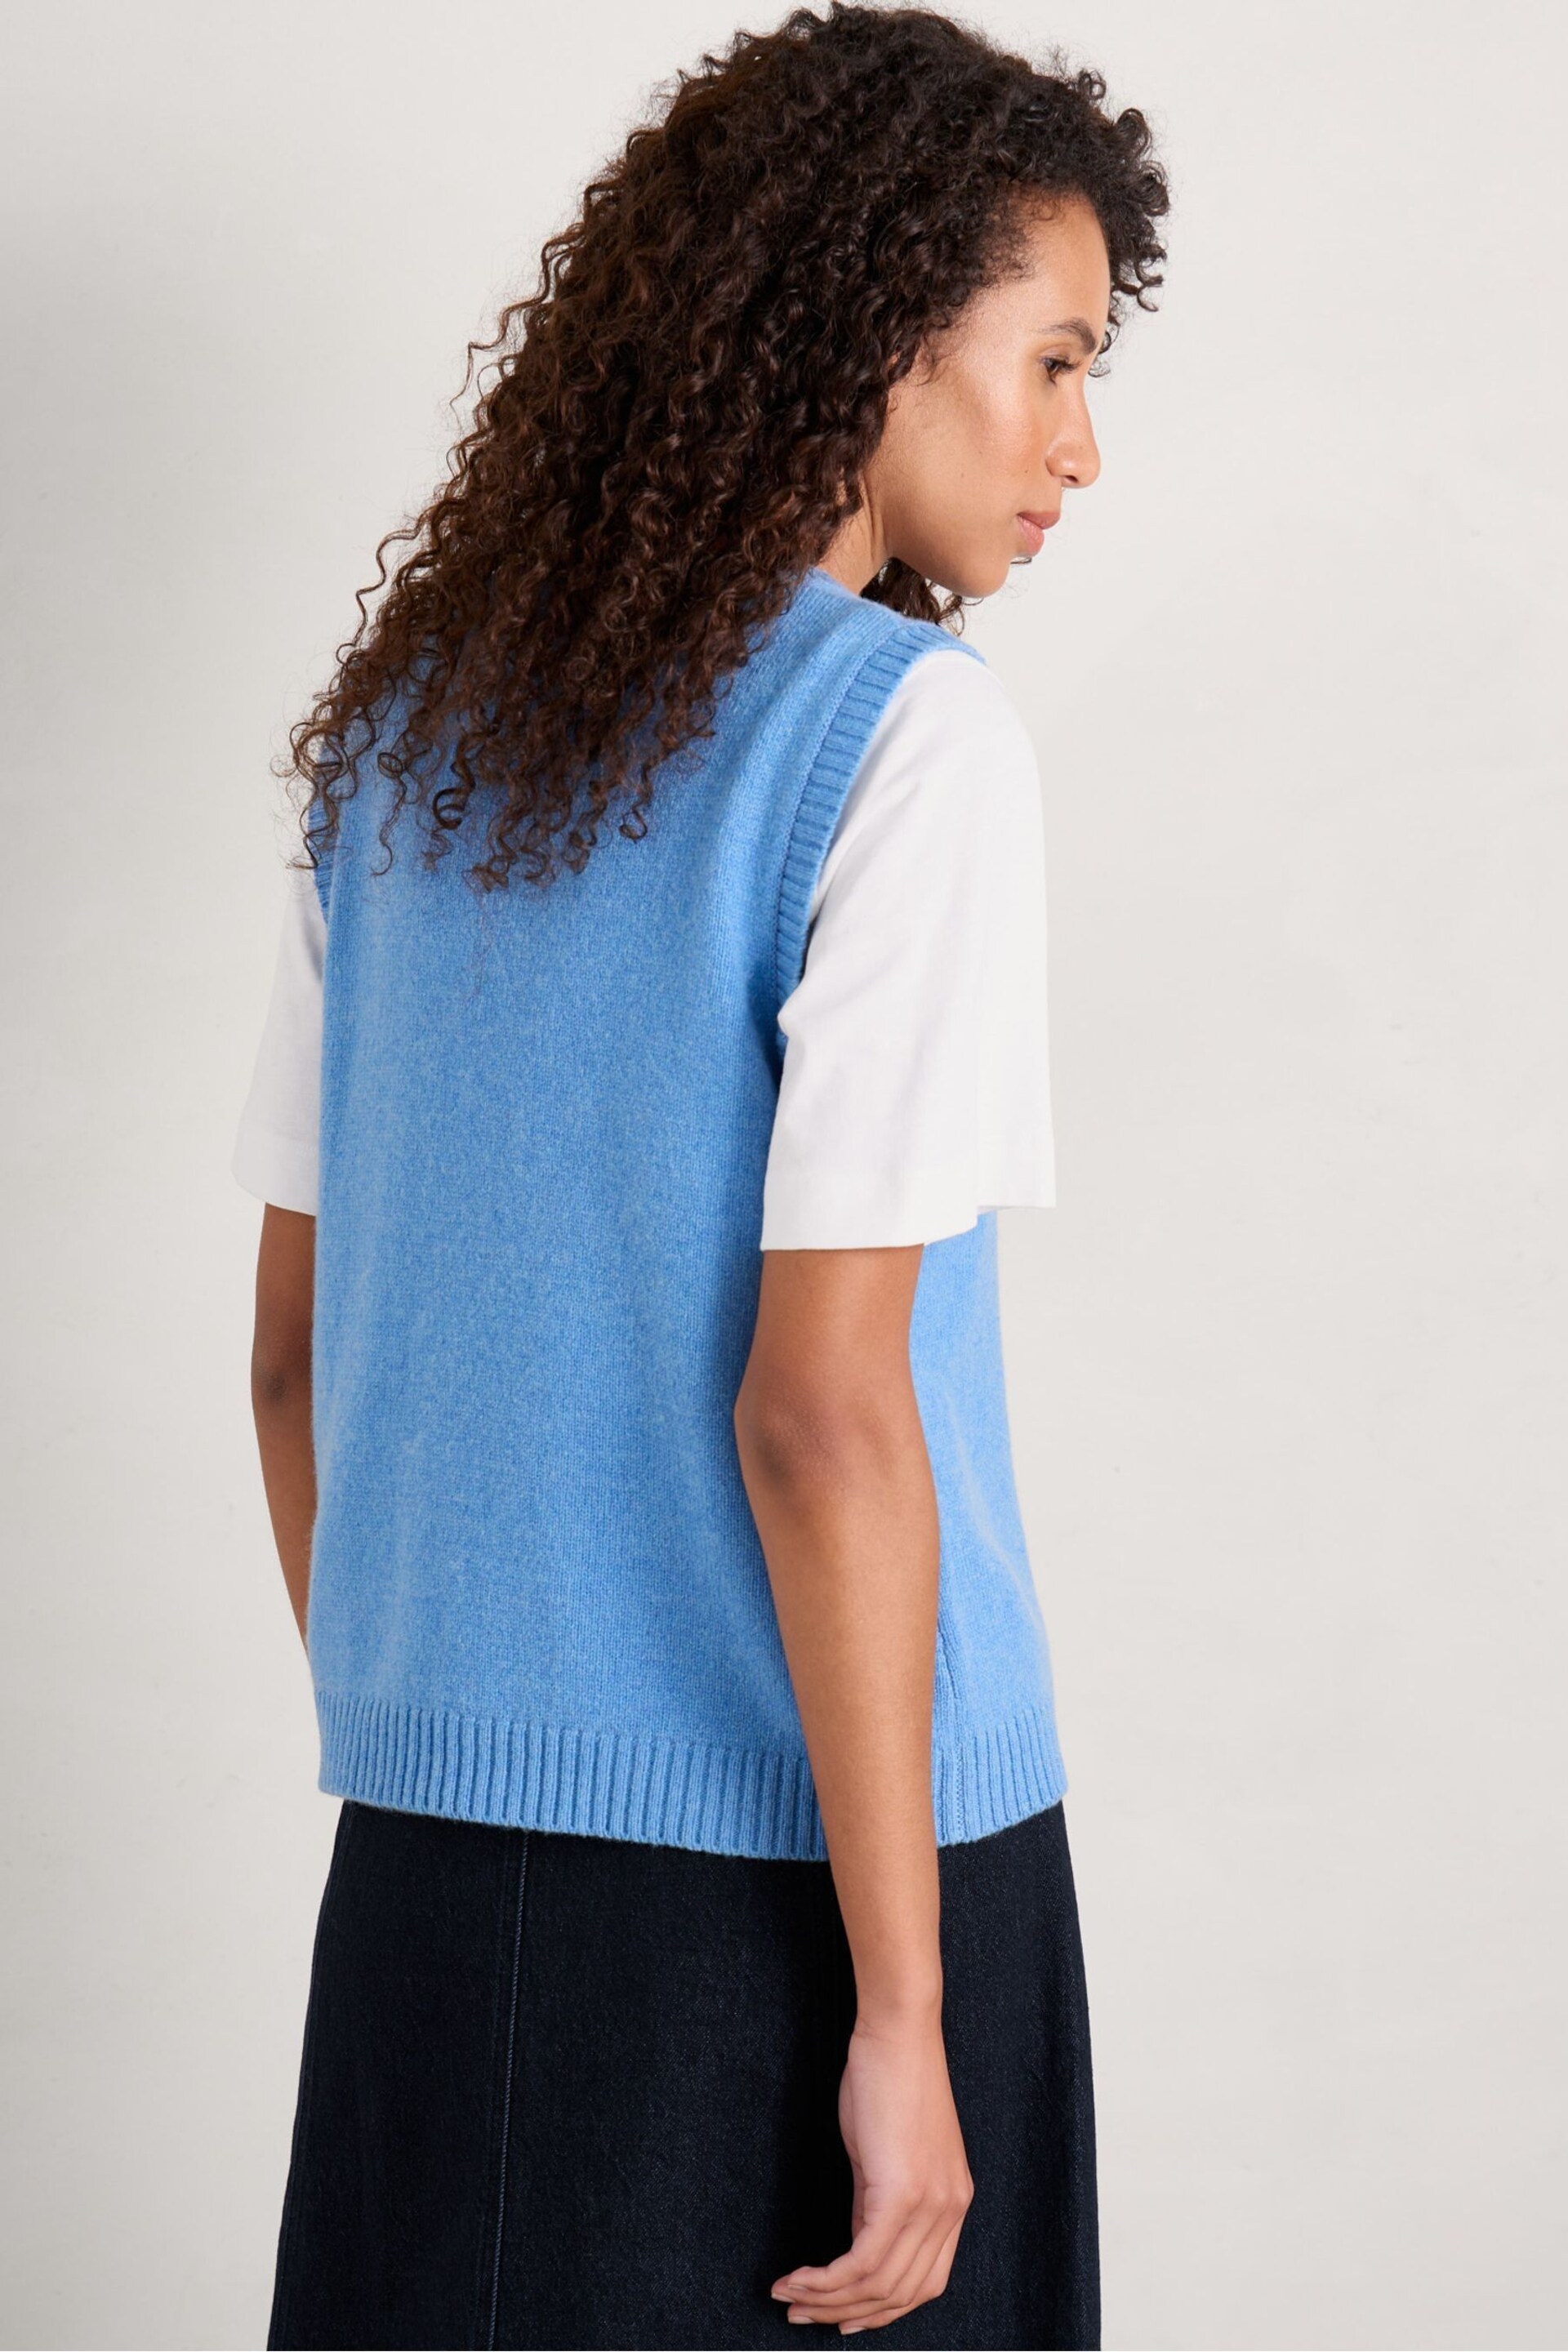 Seasalt Cornwall Blue East View Knitted Vest - Image 5 of 8